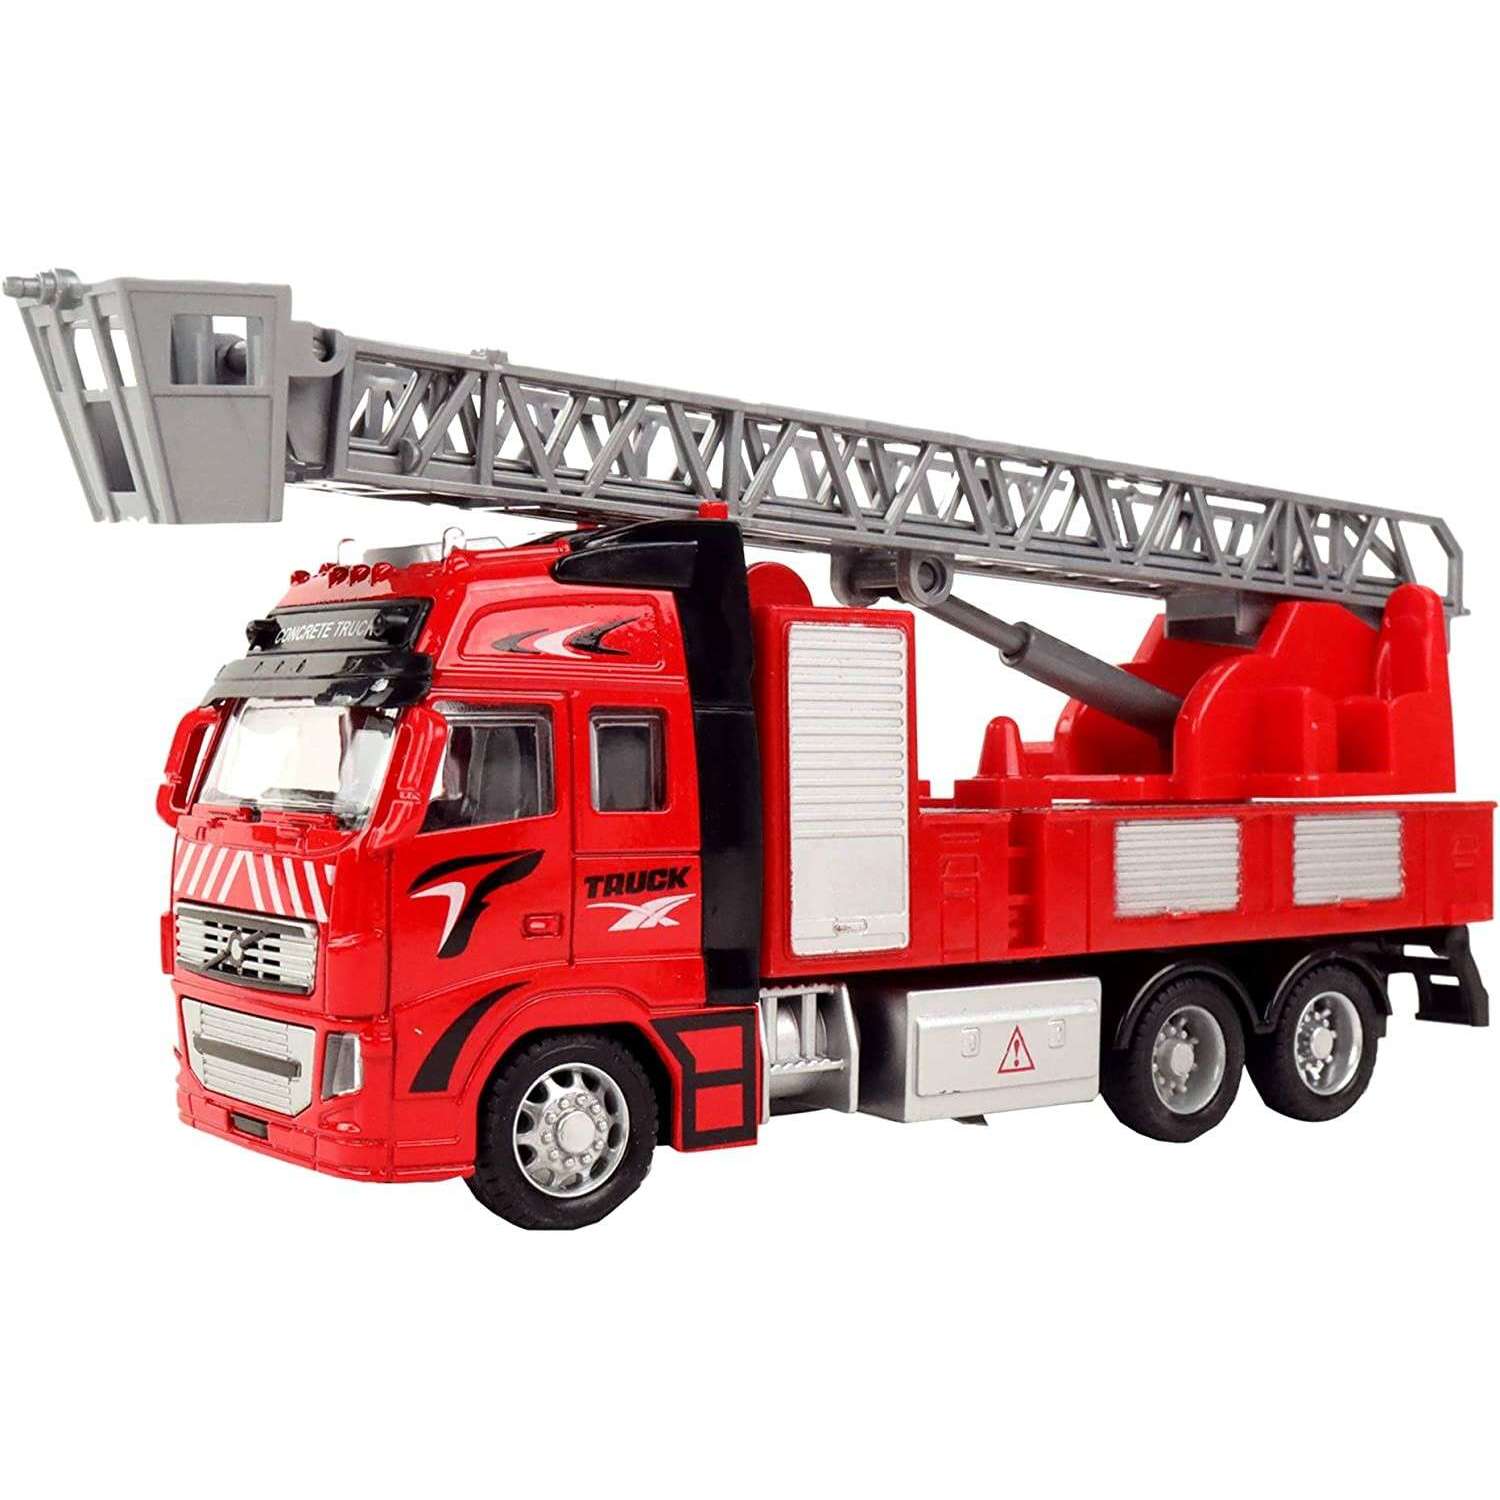 Toys N Tuck:Tranzmasters Die Cast Pull Back Fire Truck Aerial Ladders,Kandy Toys